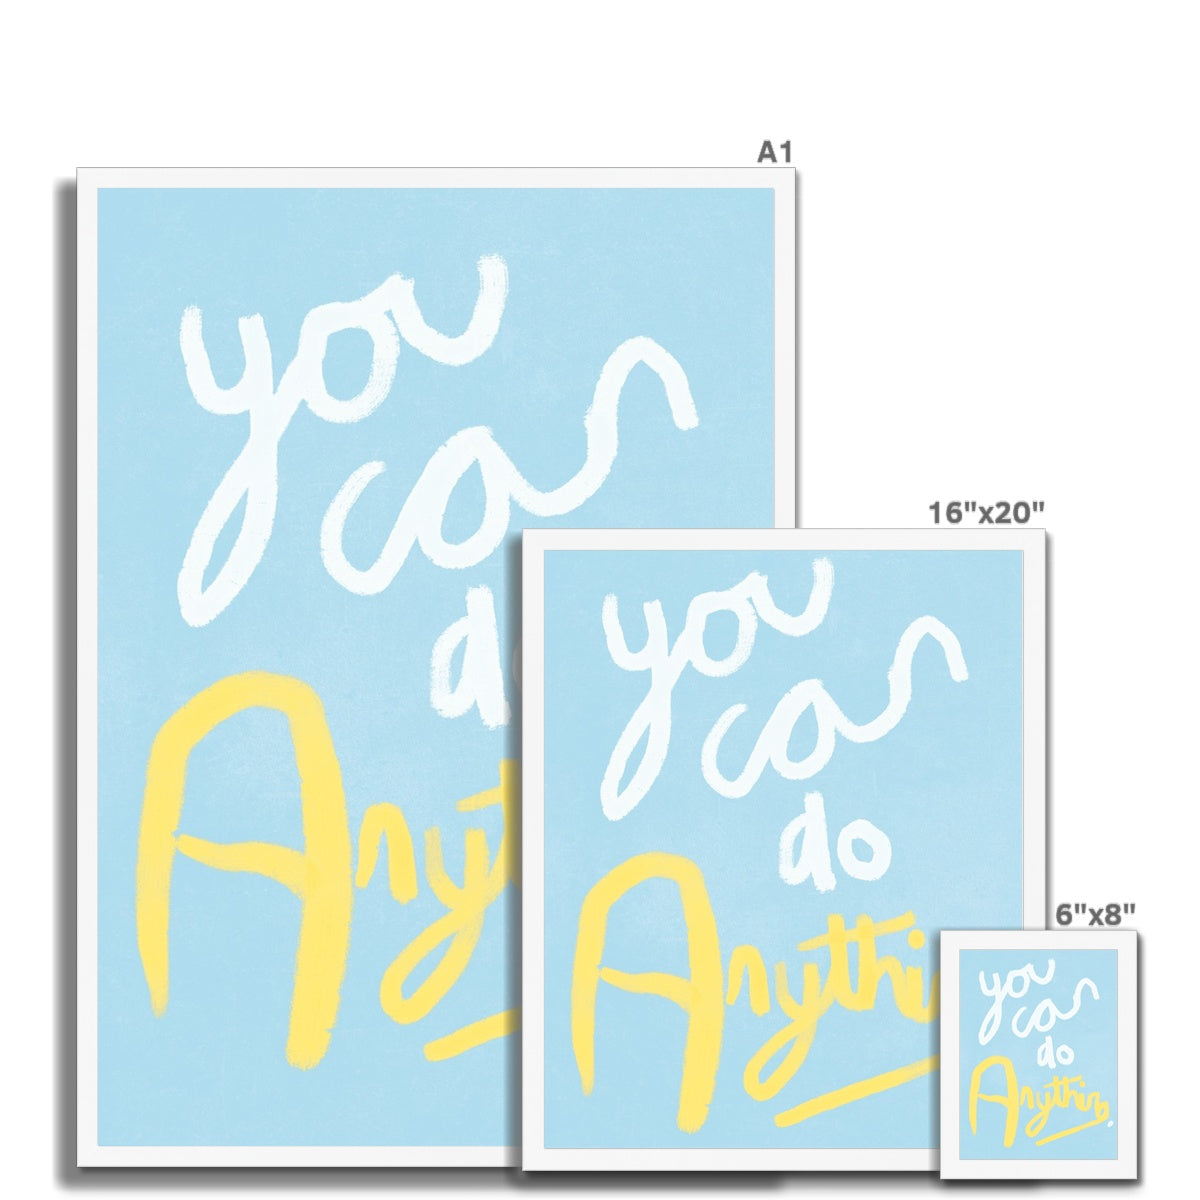 You Can Do Anything Print - Blue, White, Yellow Framed Print